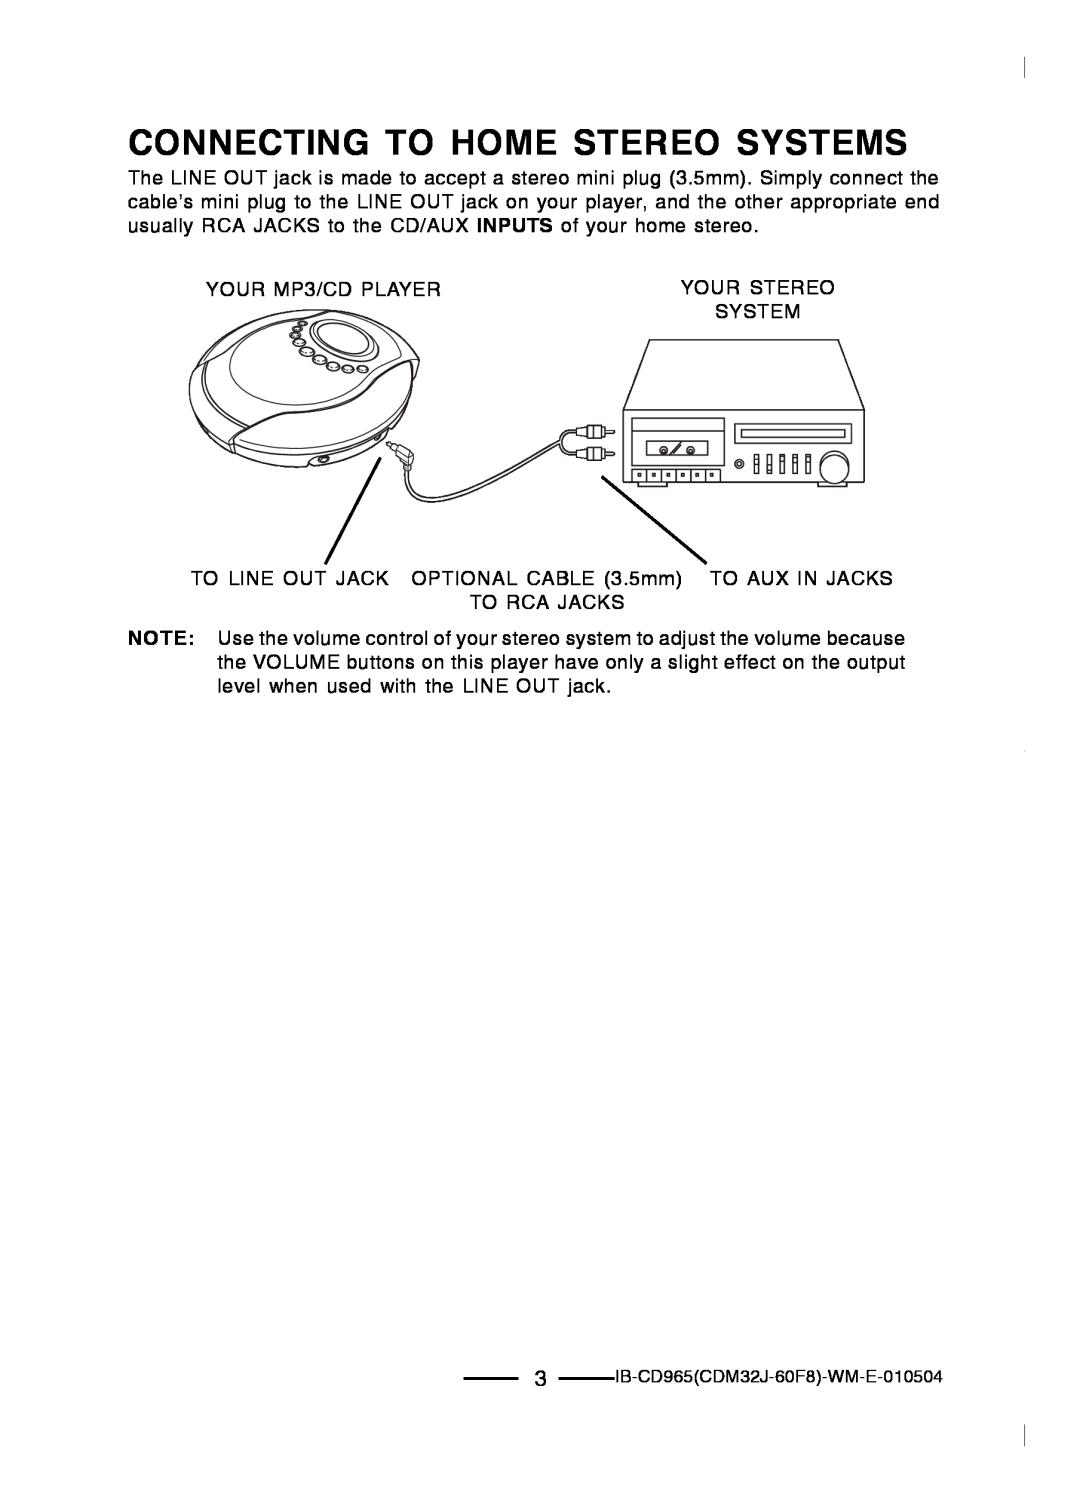 Lenoxx Electronics CD-965 operating instructions Connecting To Home Stereo Systems 